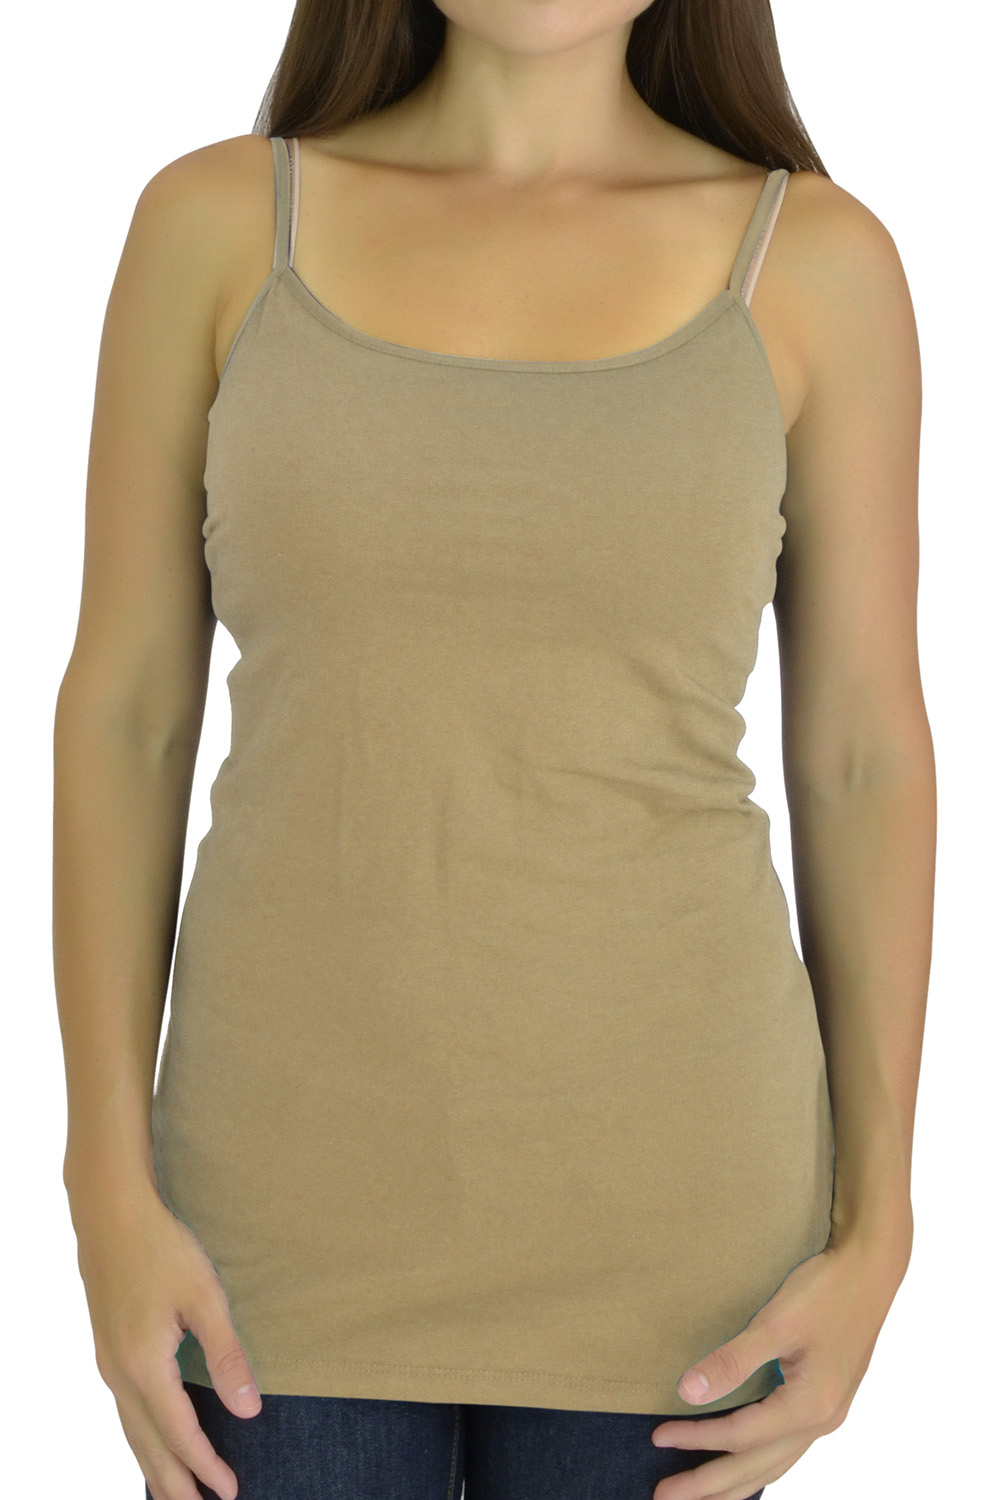 Belle Donne Women Extra Long Tank Top Built in Shelf Bra - Taupe Small